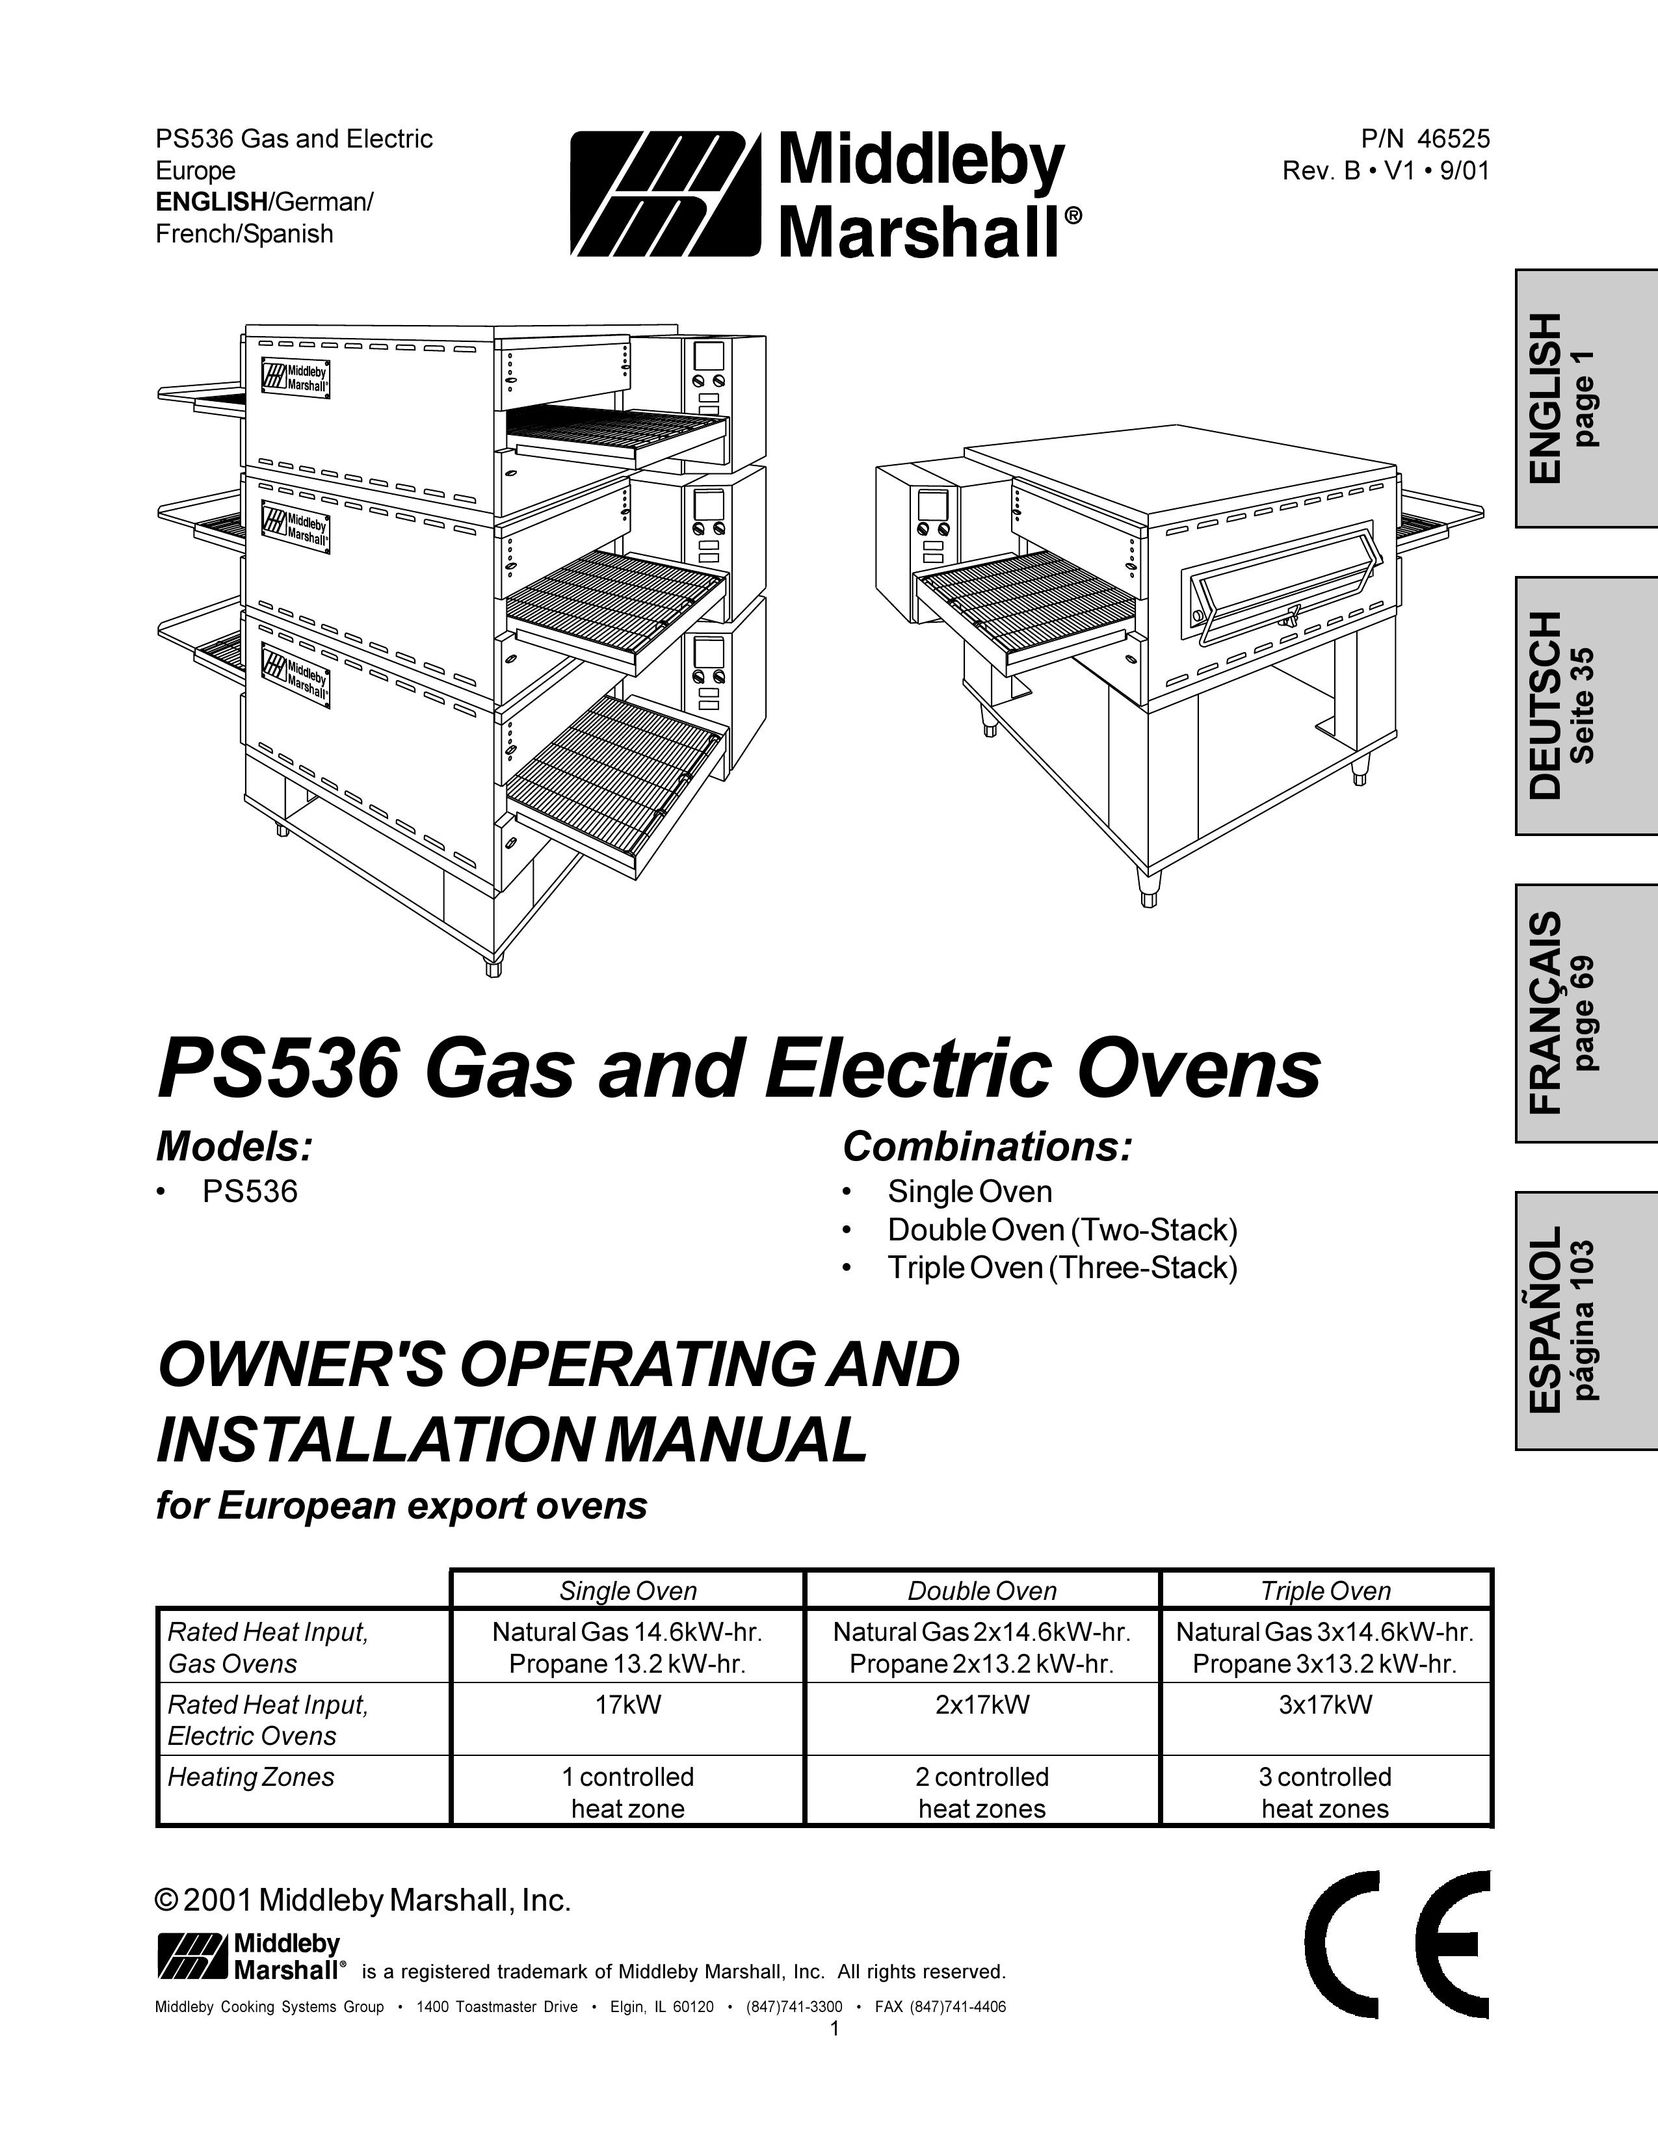 Middleby Marshall Model PS536 Oven User Manual